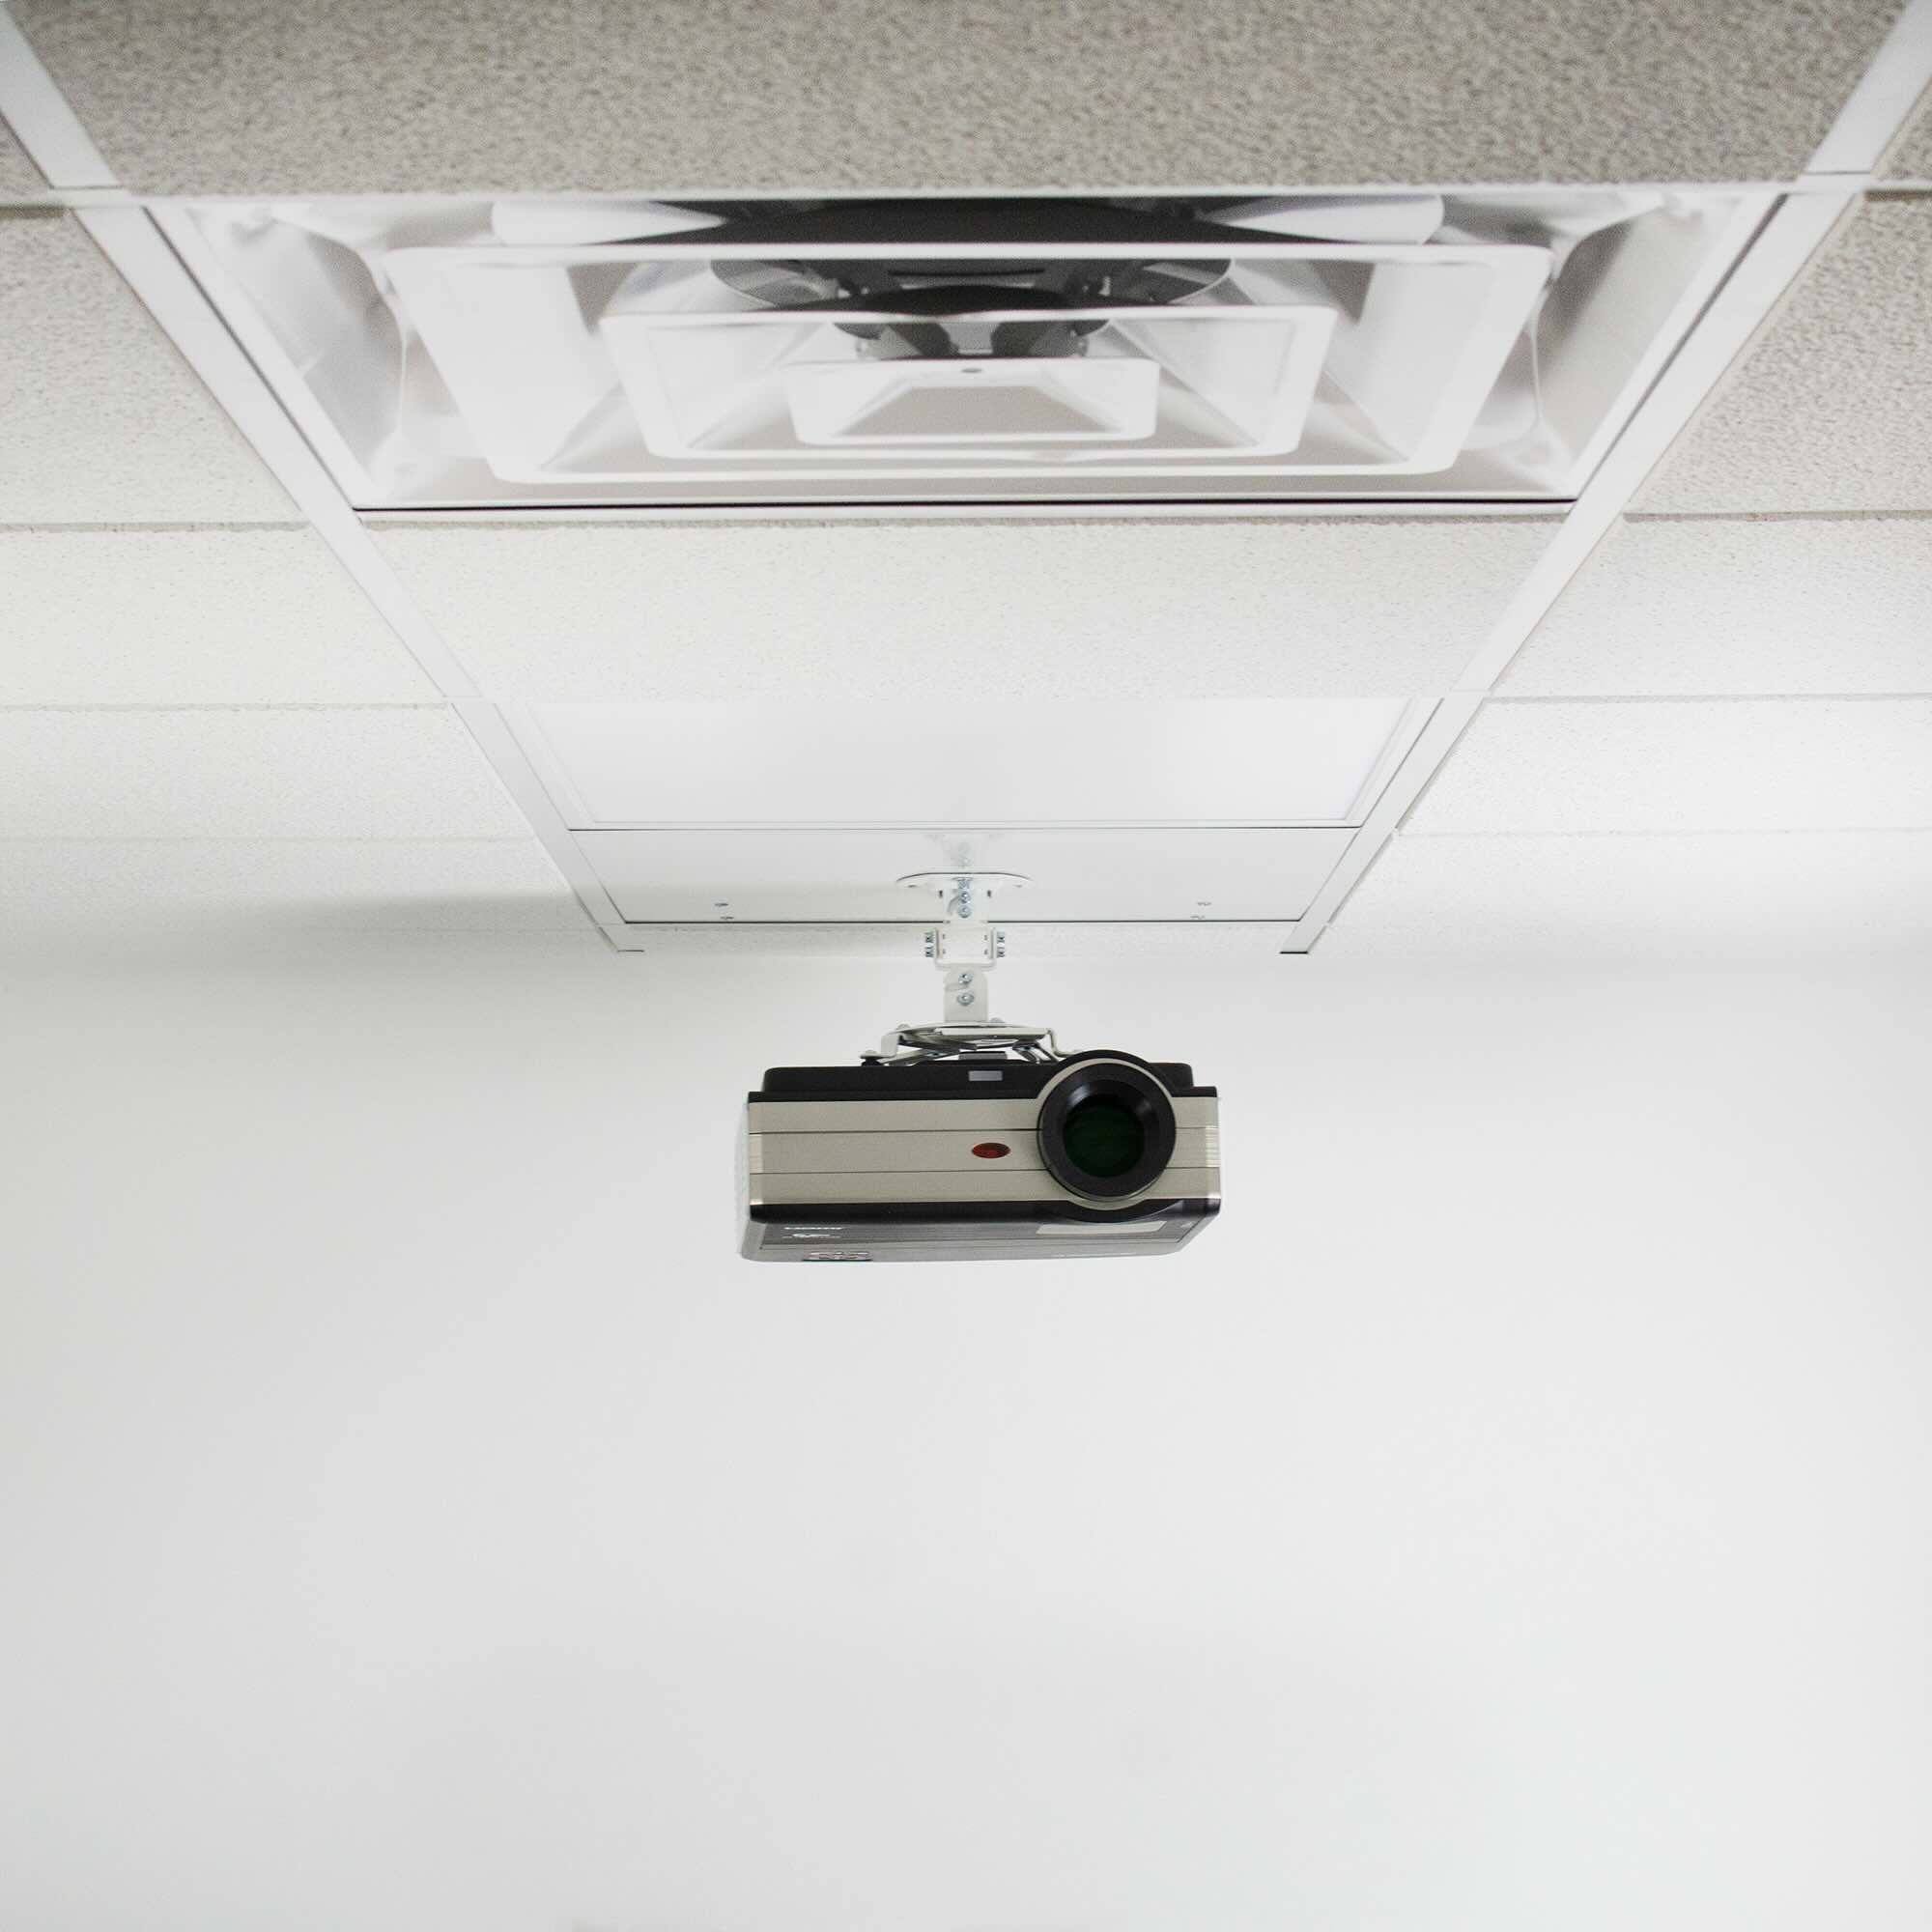 How To Hang A Projector From A Drop Ceiling